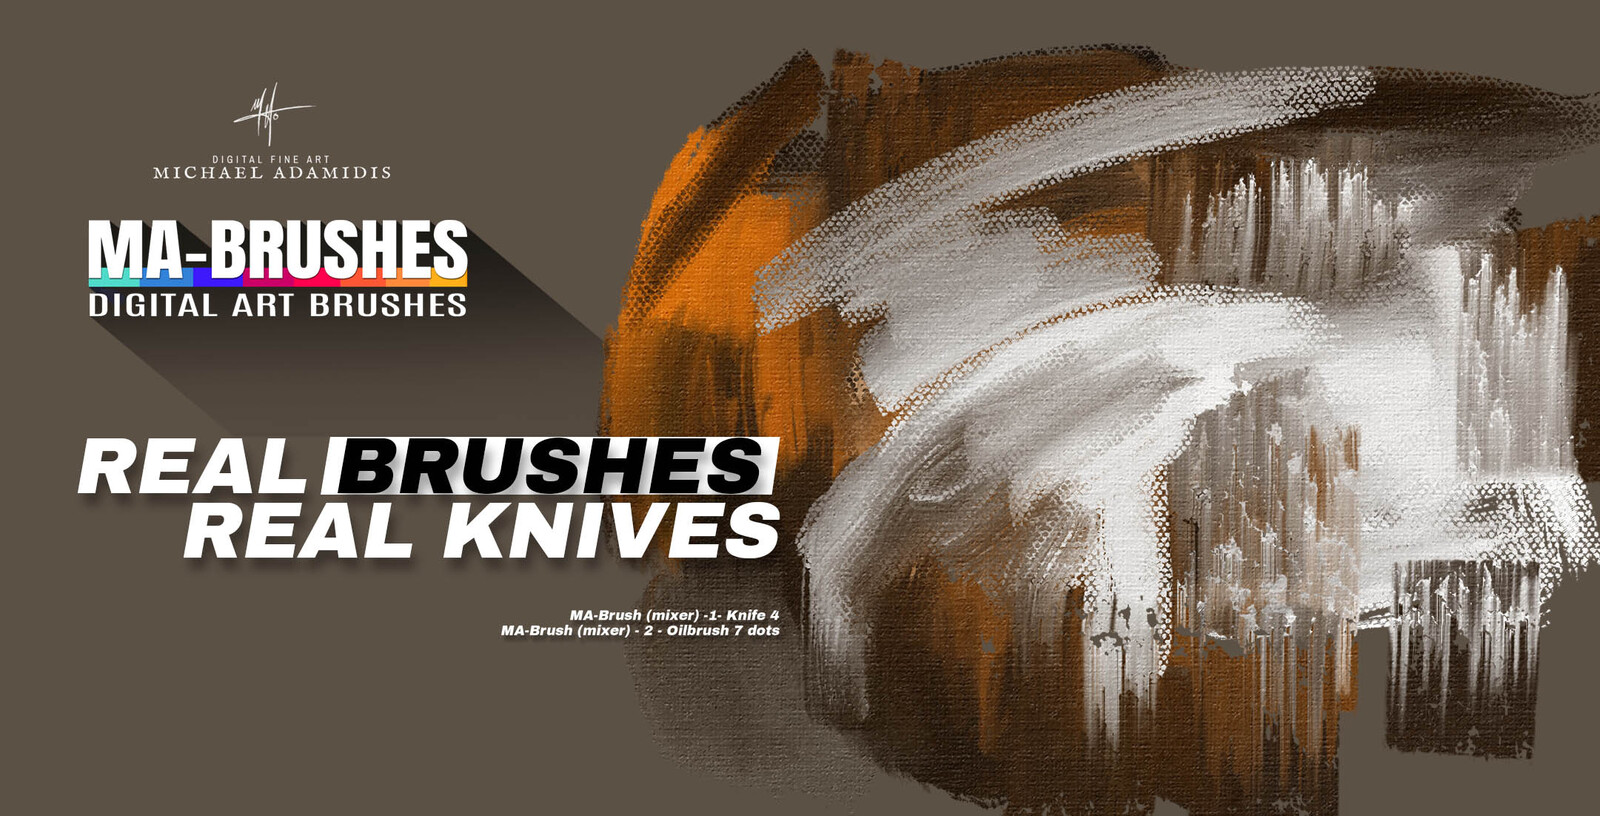 REAL Oil Brushes - REAL Knives -&gt; 2 Stars of the MA-Brushes